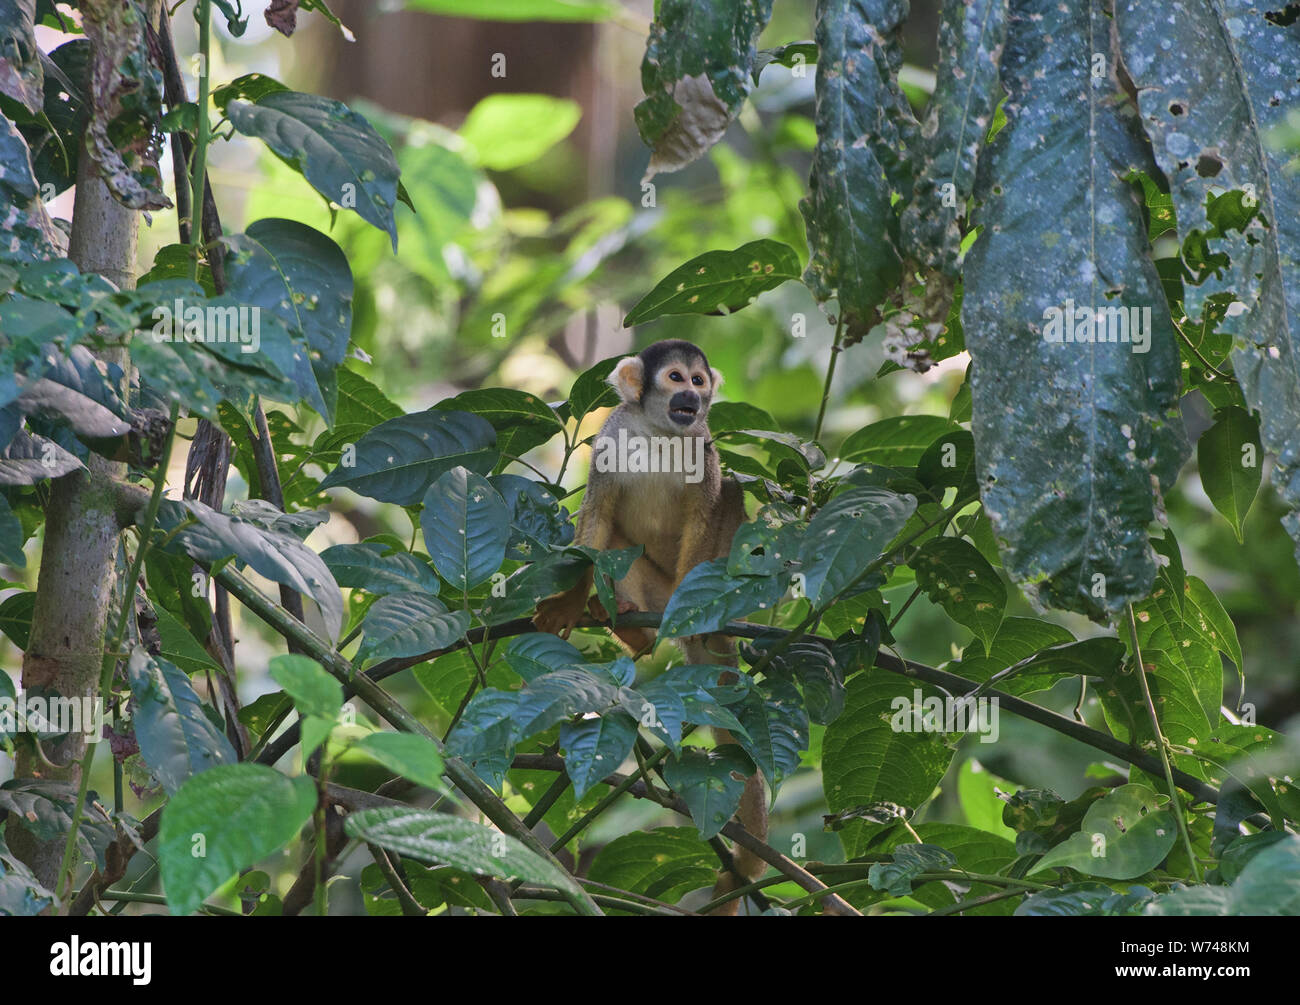 King of the jungle, squirrel monkey in the Tambopata Reserve, Peruvian Amazon Stock Photo